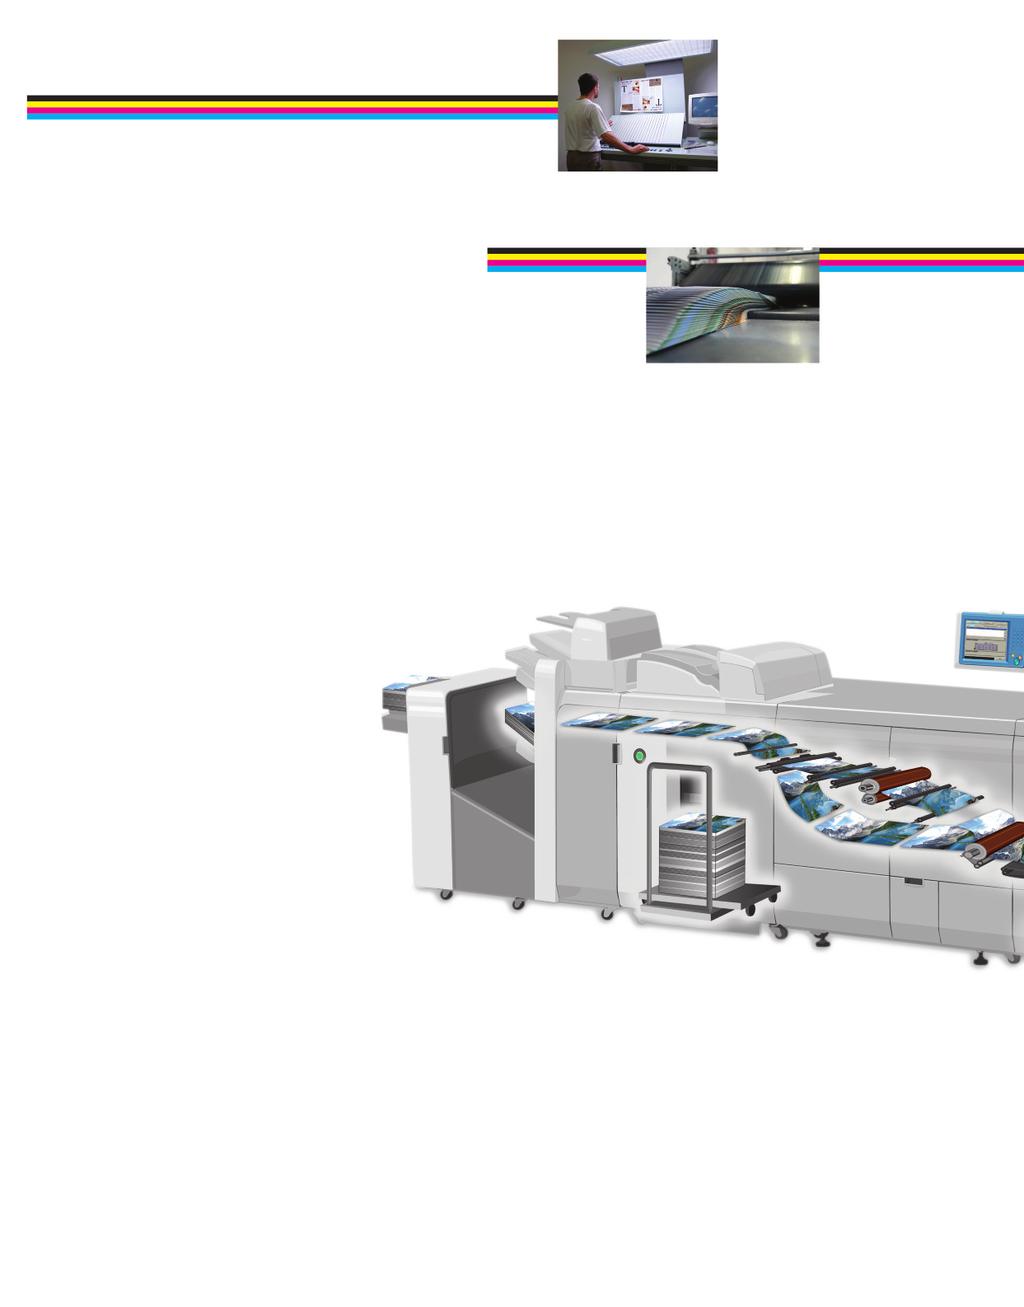 TAKE THE imagepress C7000VP DIGITAL PRESS TOUR Canon s investment resulted in better image quality, productivity, and versatility.